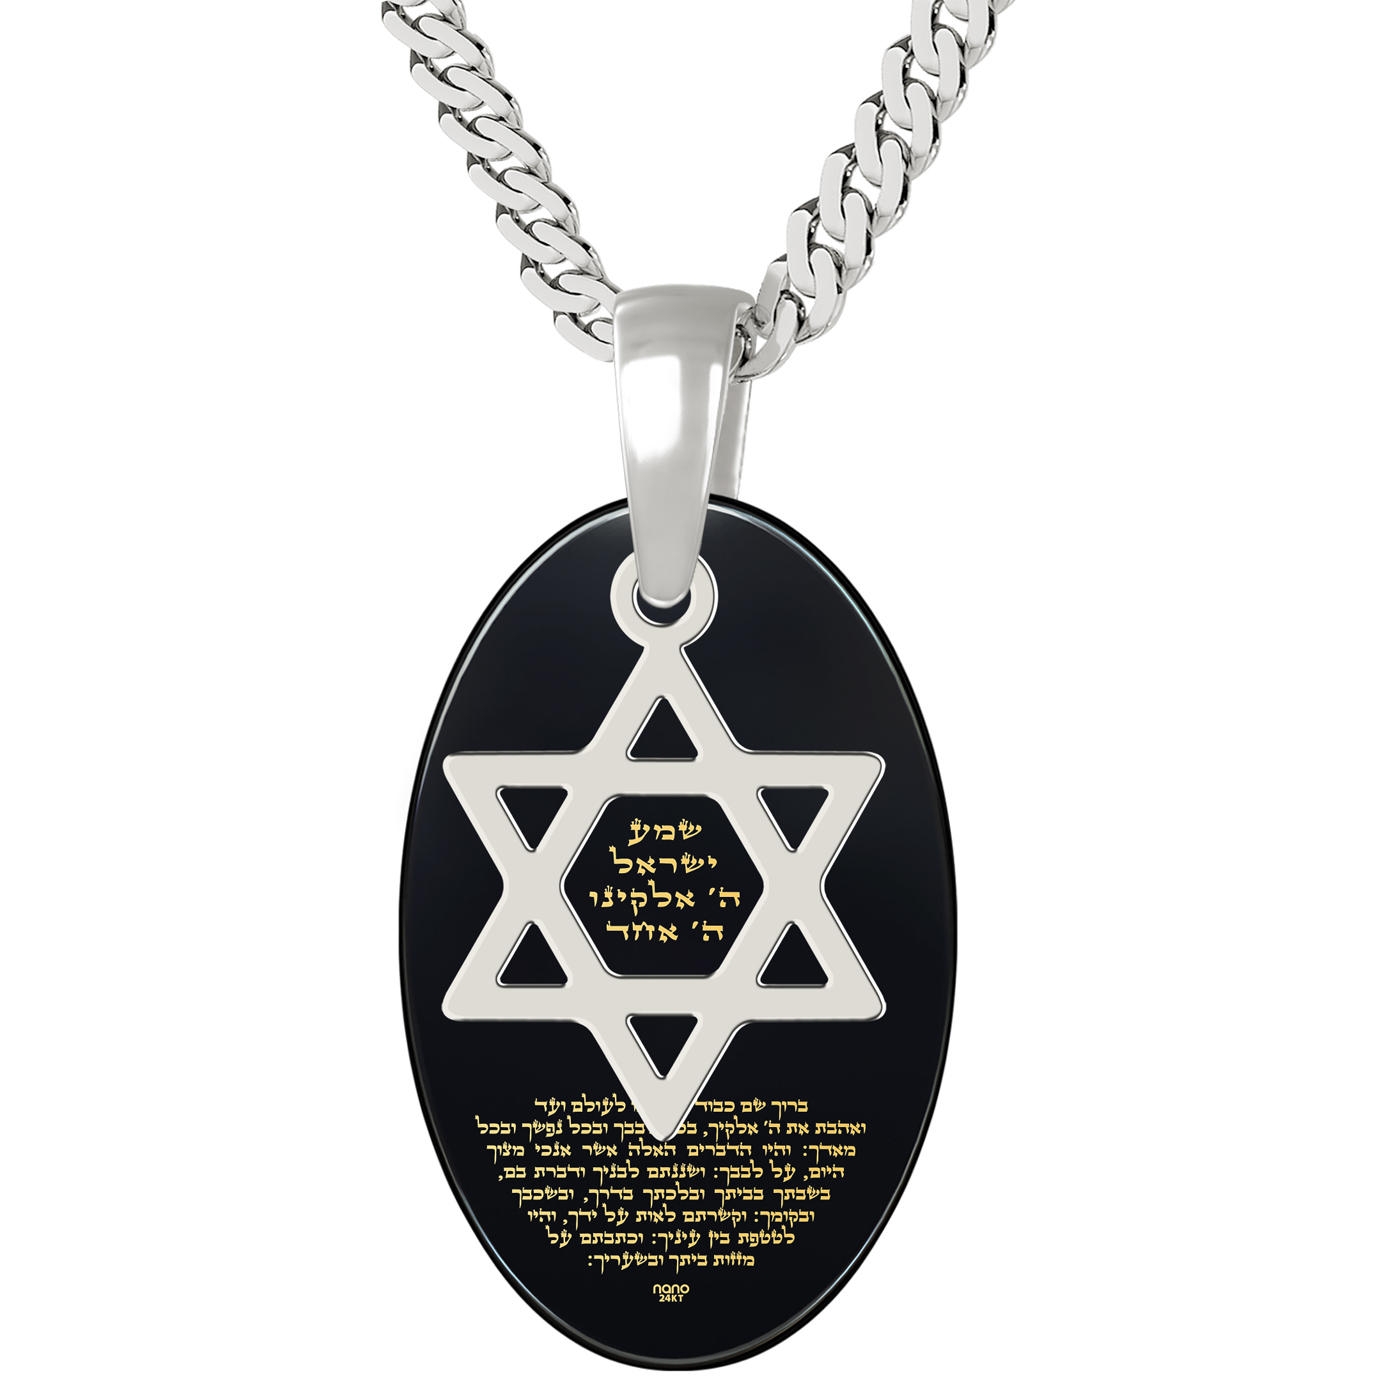 Sterling Silver and Onyx Oval Star of David Necklace with Micro-Inscribed Shema Yisrael   - 3